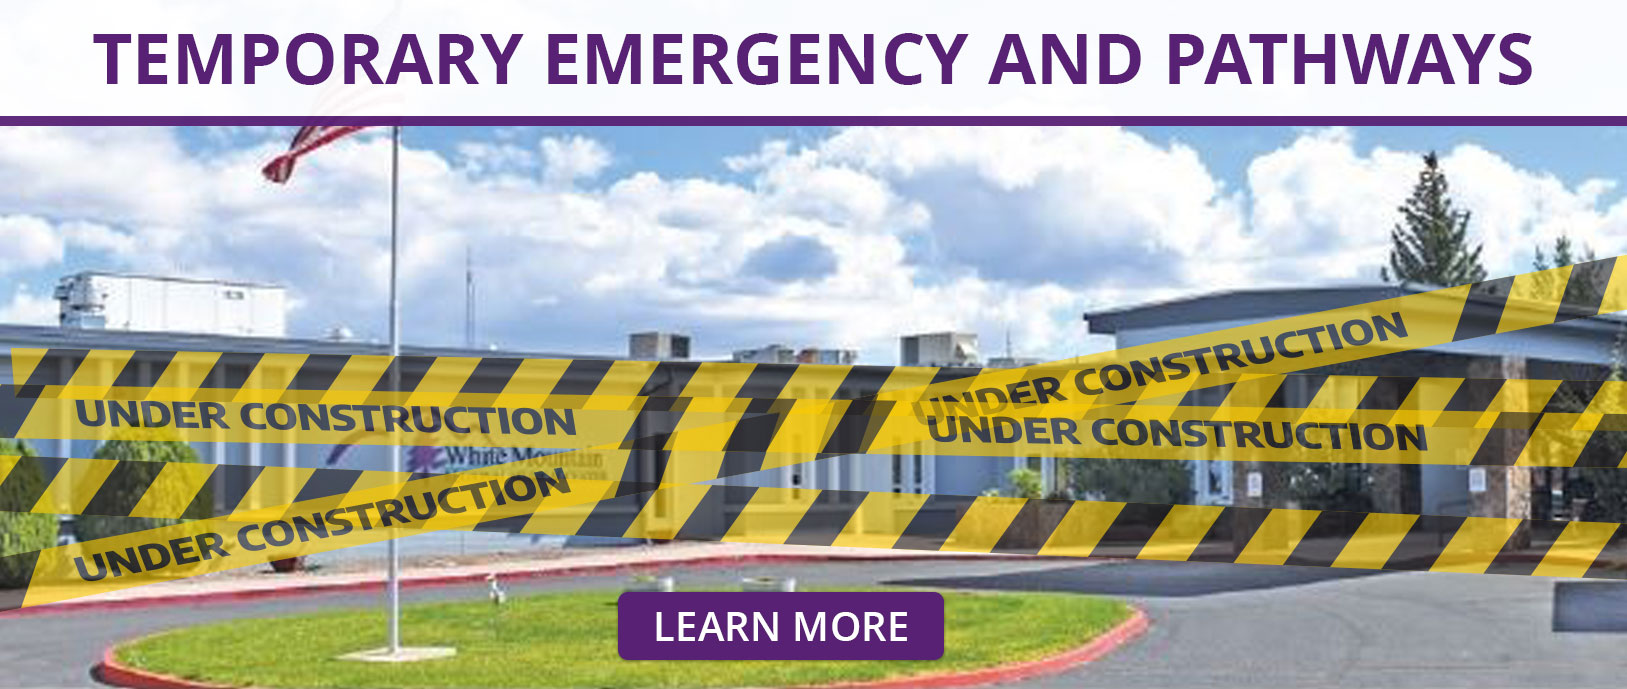 Temporary Emergency and pathways

Click Here to Learn More